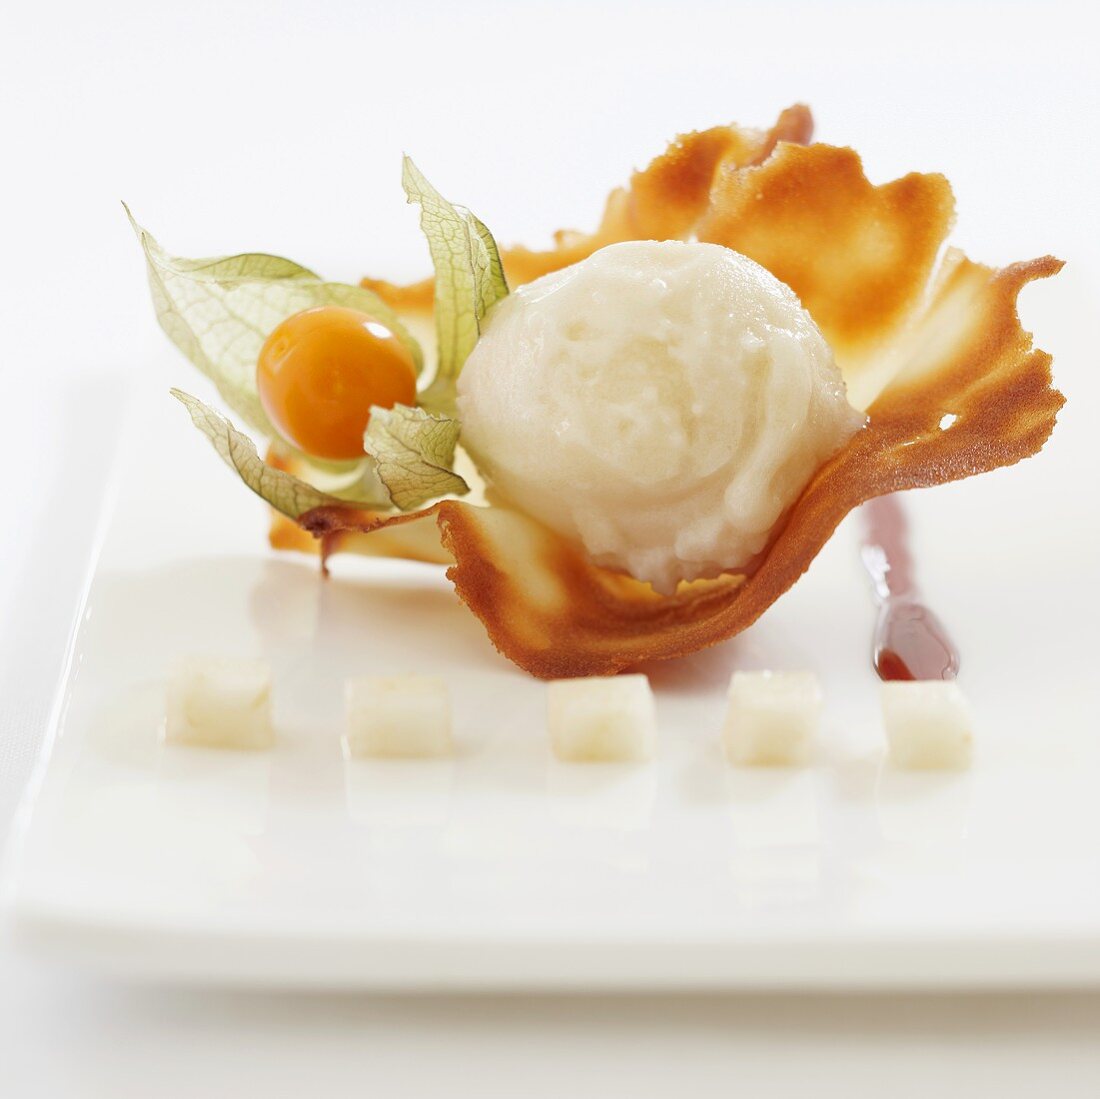 Vanilla ice cream on a wafer with a physalis